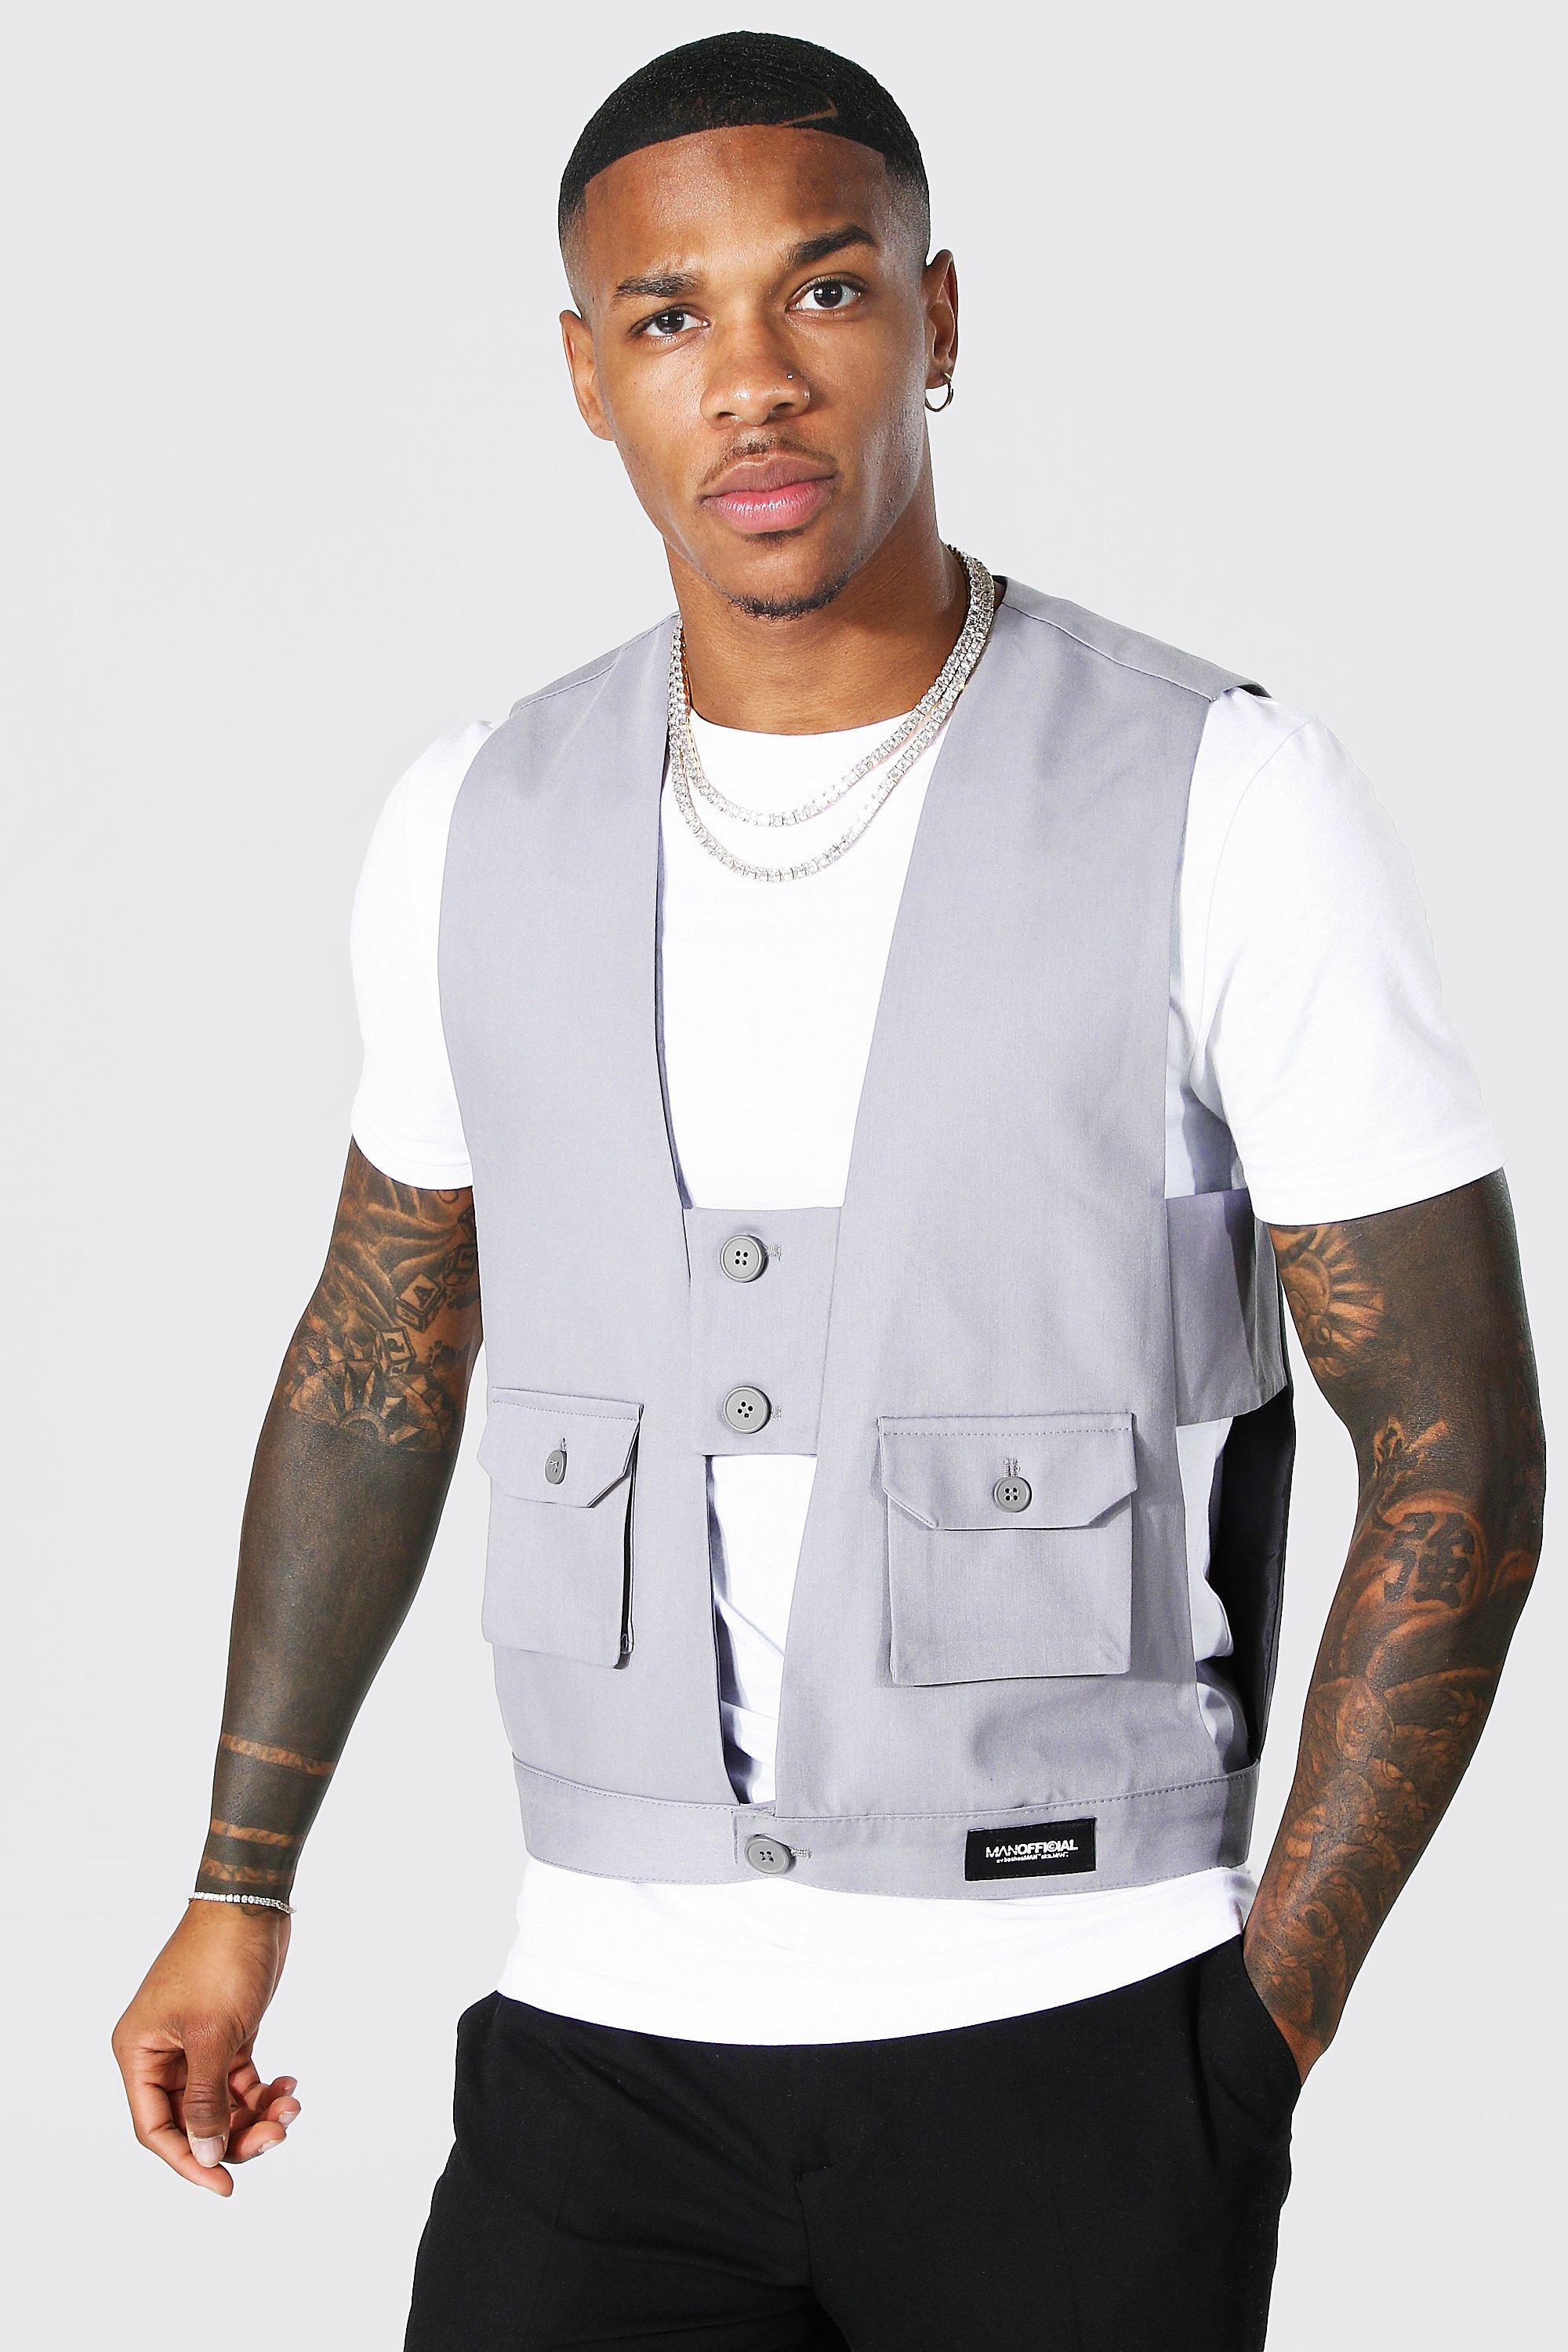 Fashion stores including Asos and Boohoo are selling lookalike stab vests